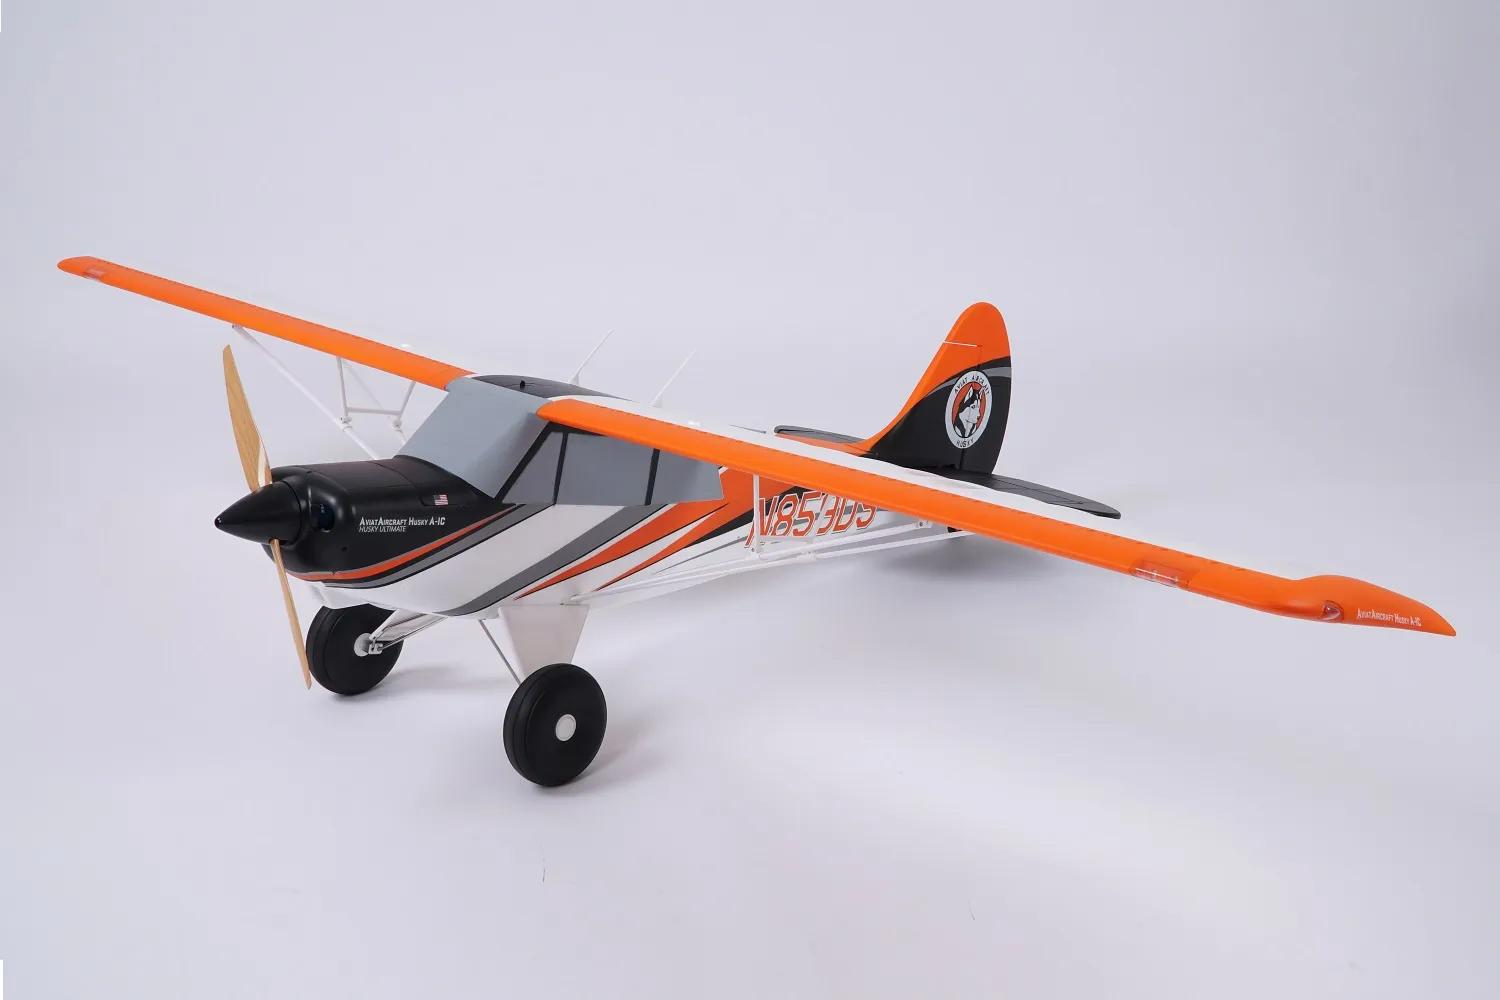 Husky Rc Plane: Battery charge and weather conditions.